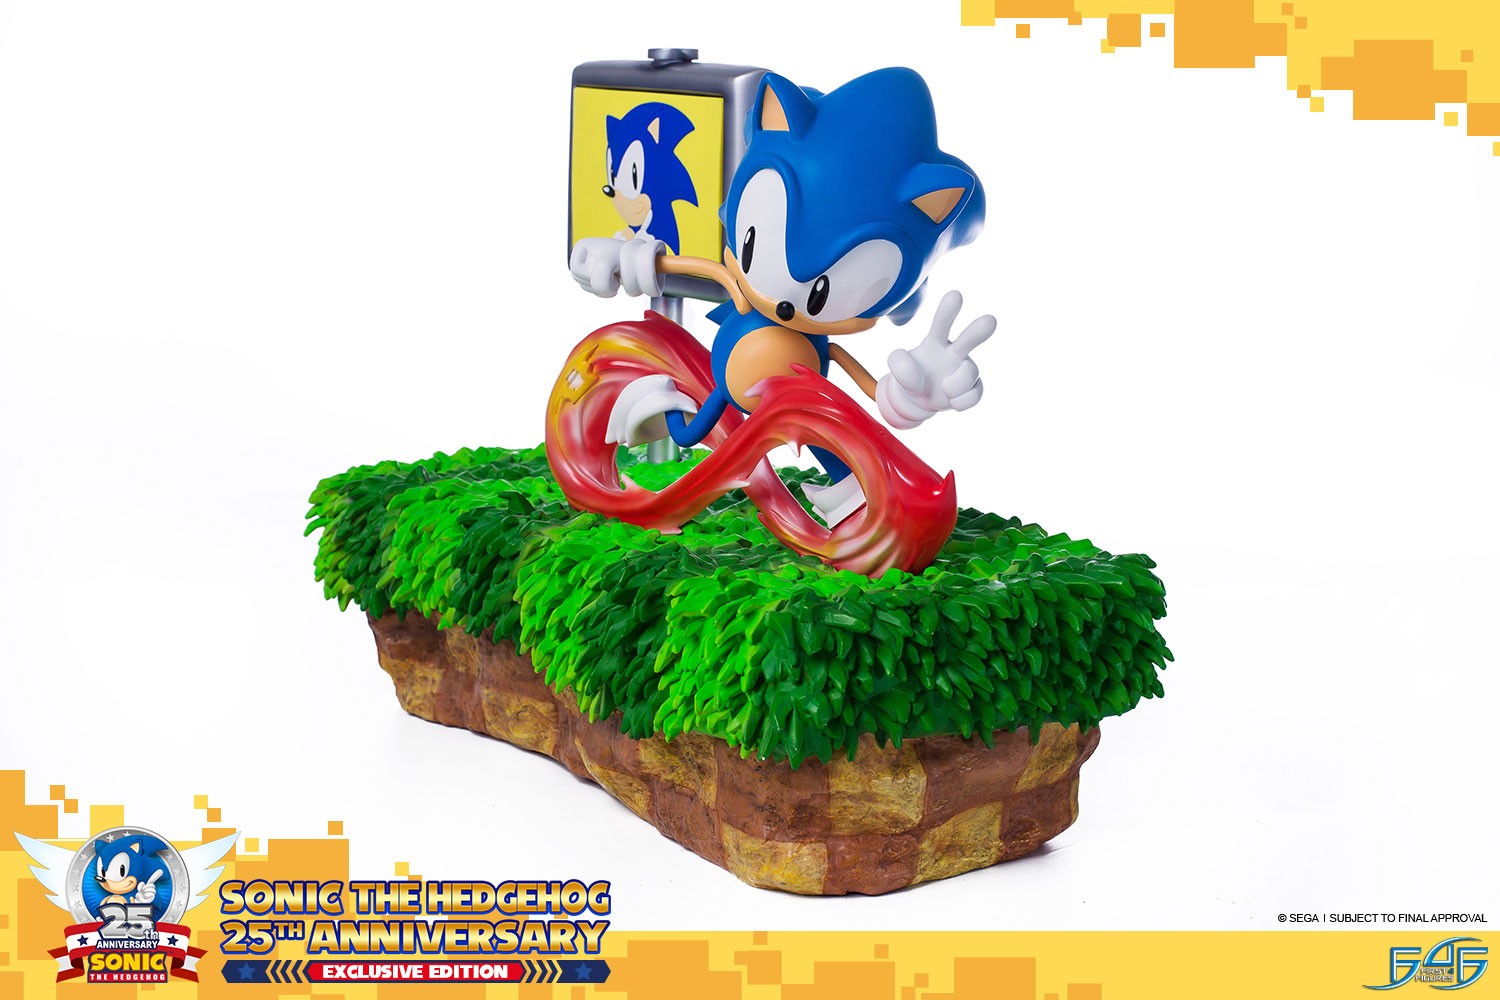 Sonic The Hedgehog 25th Anniversary (Exclusive)1500 x 1000